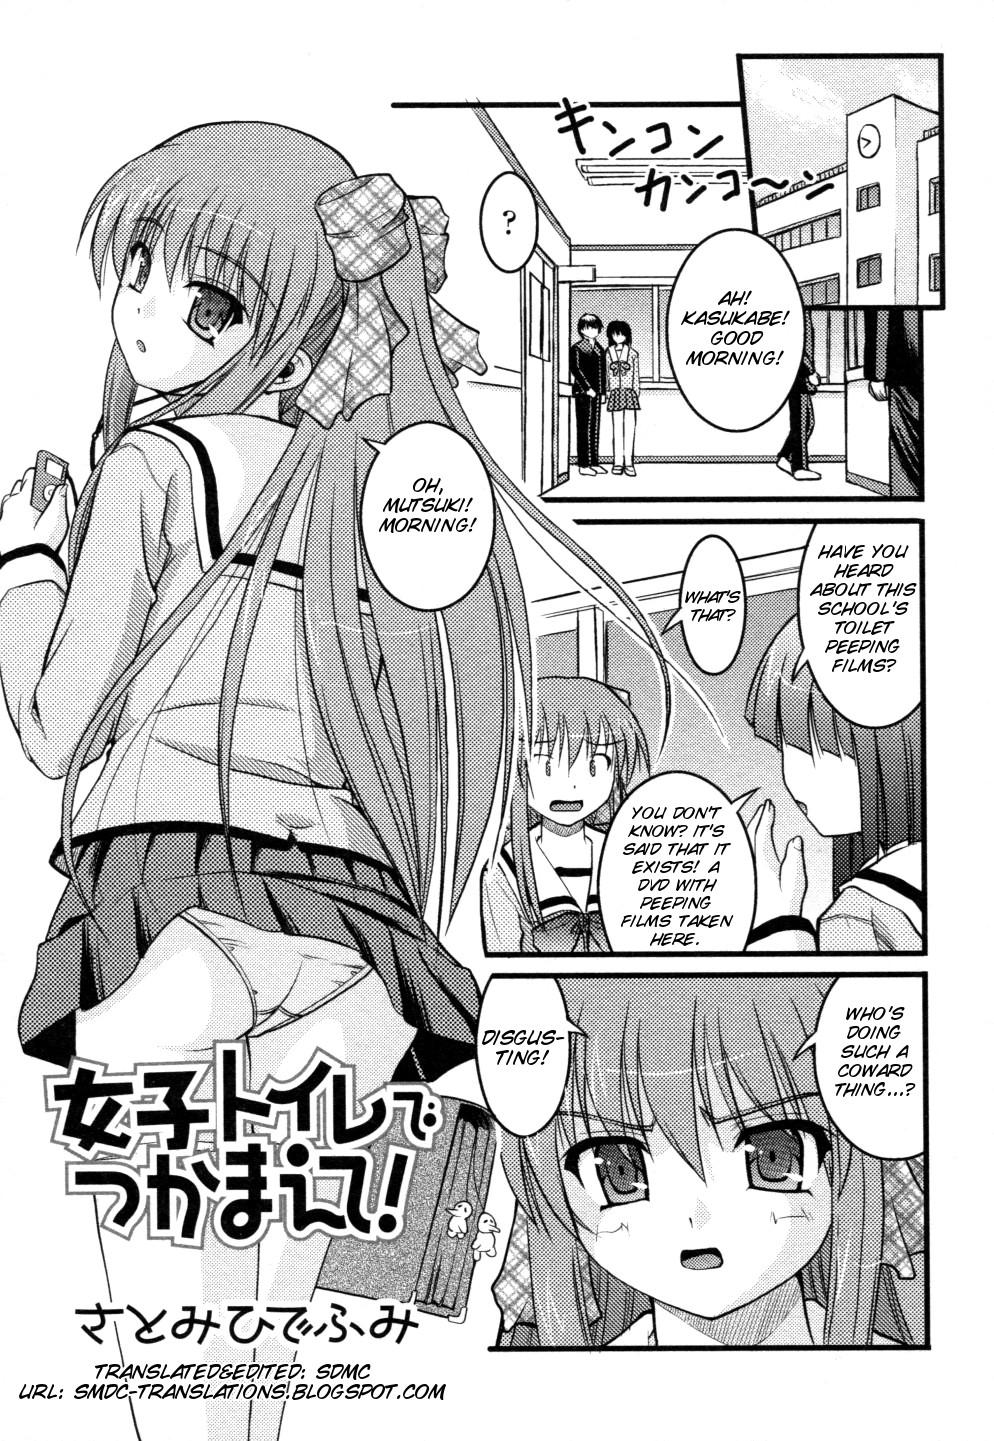 Bound [Anthology Nozoite wa Ikenai 3](do not peep 3) ep4 [Satomi Hidefumi] - The Catcher in The Girl's Room(Eng) Lovers - Page 3